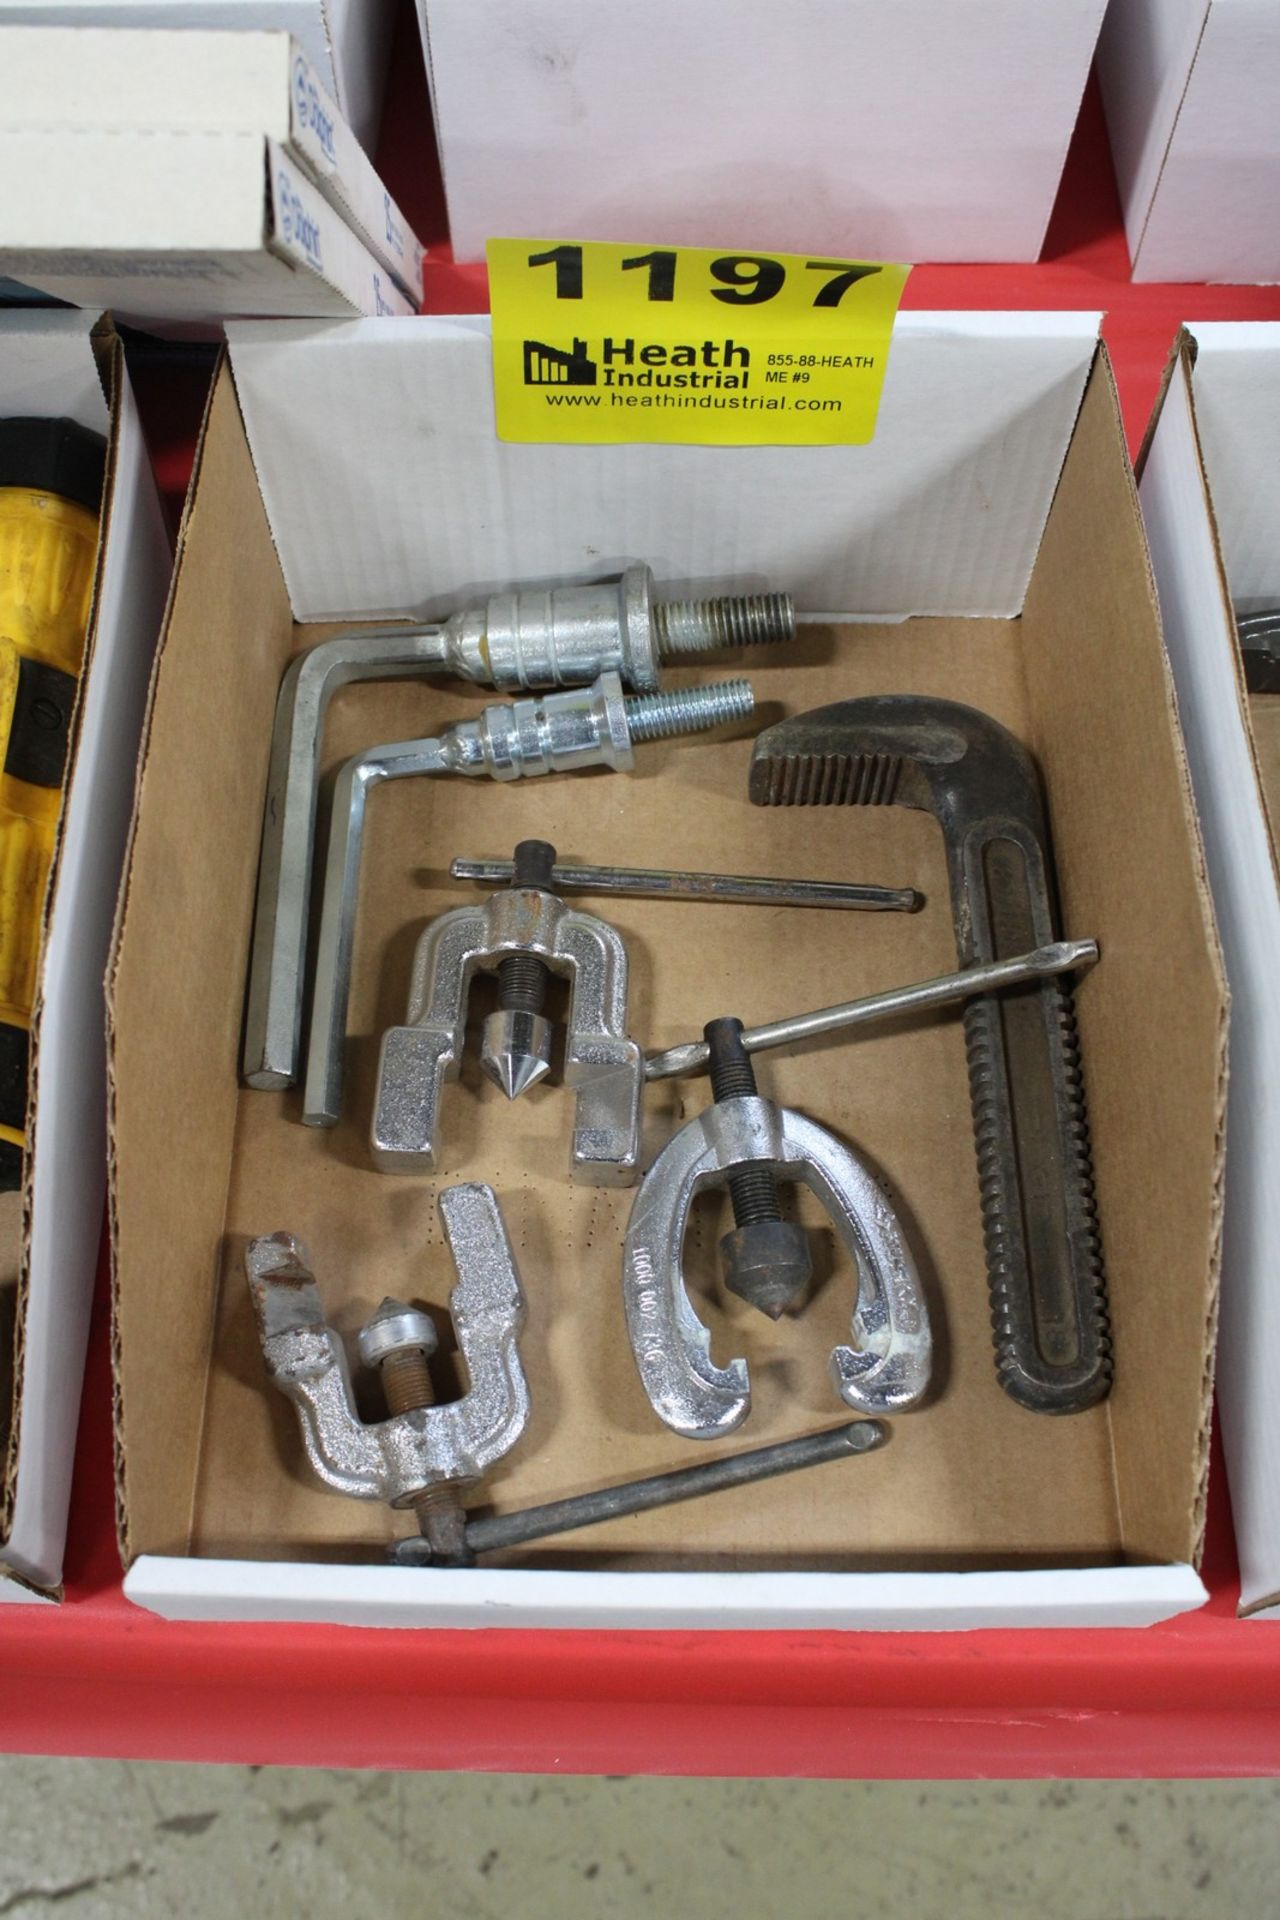 CABLE CUTTER, FLARING TOOLS, ETC. IN (2) BOXES - Image 2 of 2